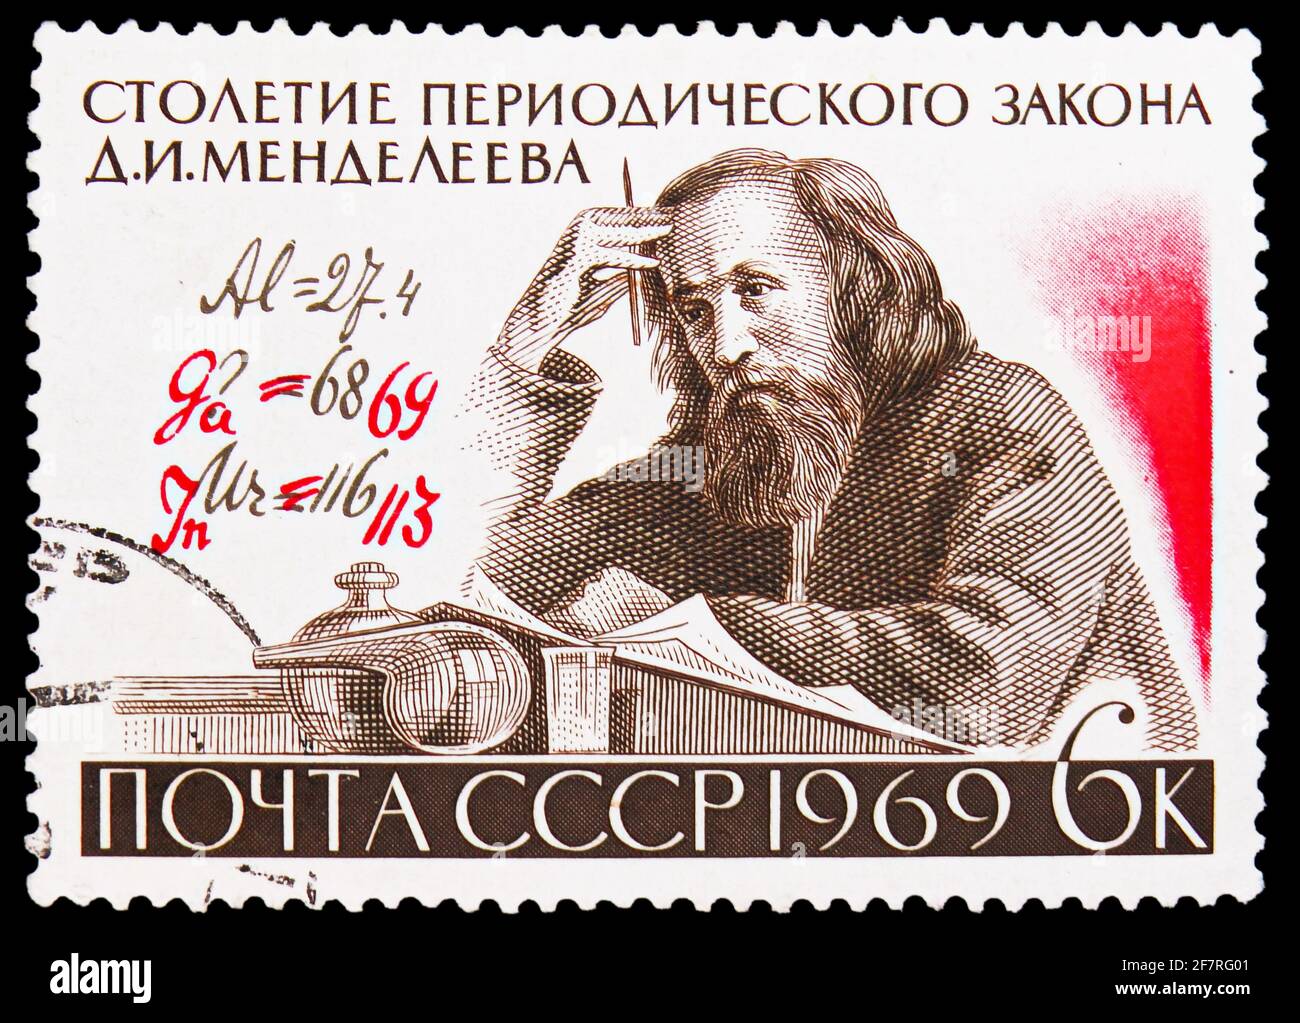 MOSCOW, RUSSIA - JANUARY 17, 2021: Postage stamp printed in Soviet Union devoted to Centenary of Mendeleev's Periodic Table of Elements, serie, circa Stock Photo